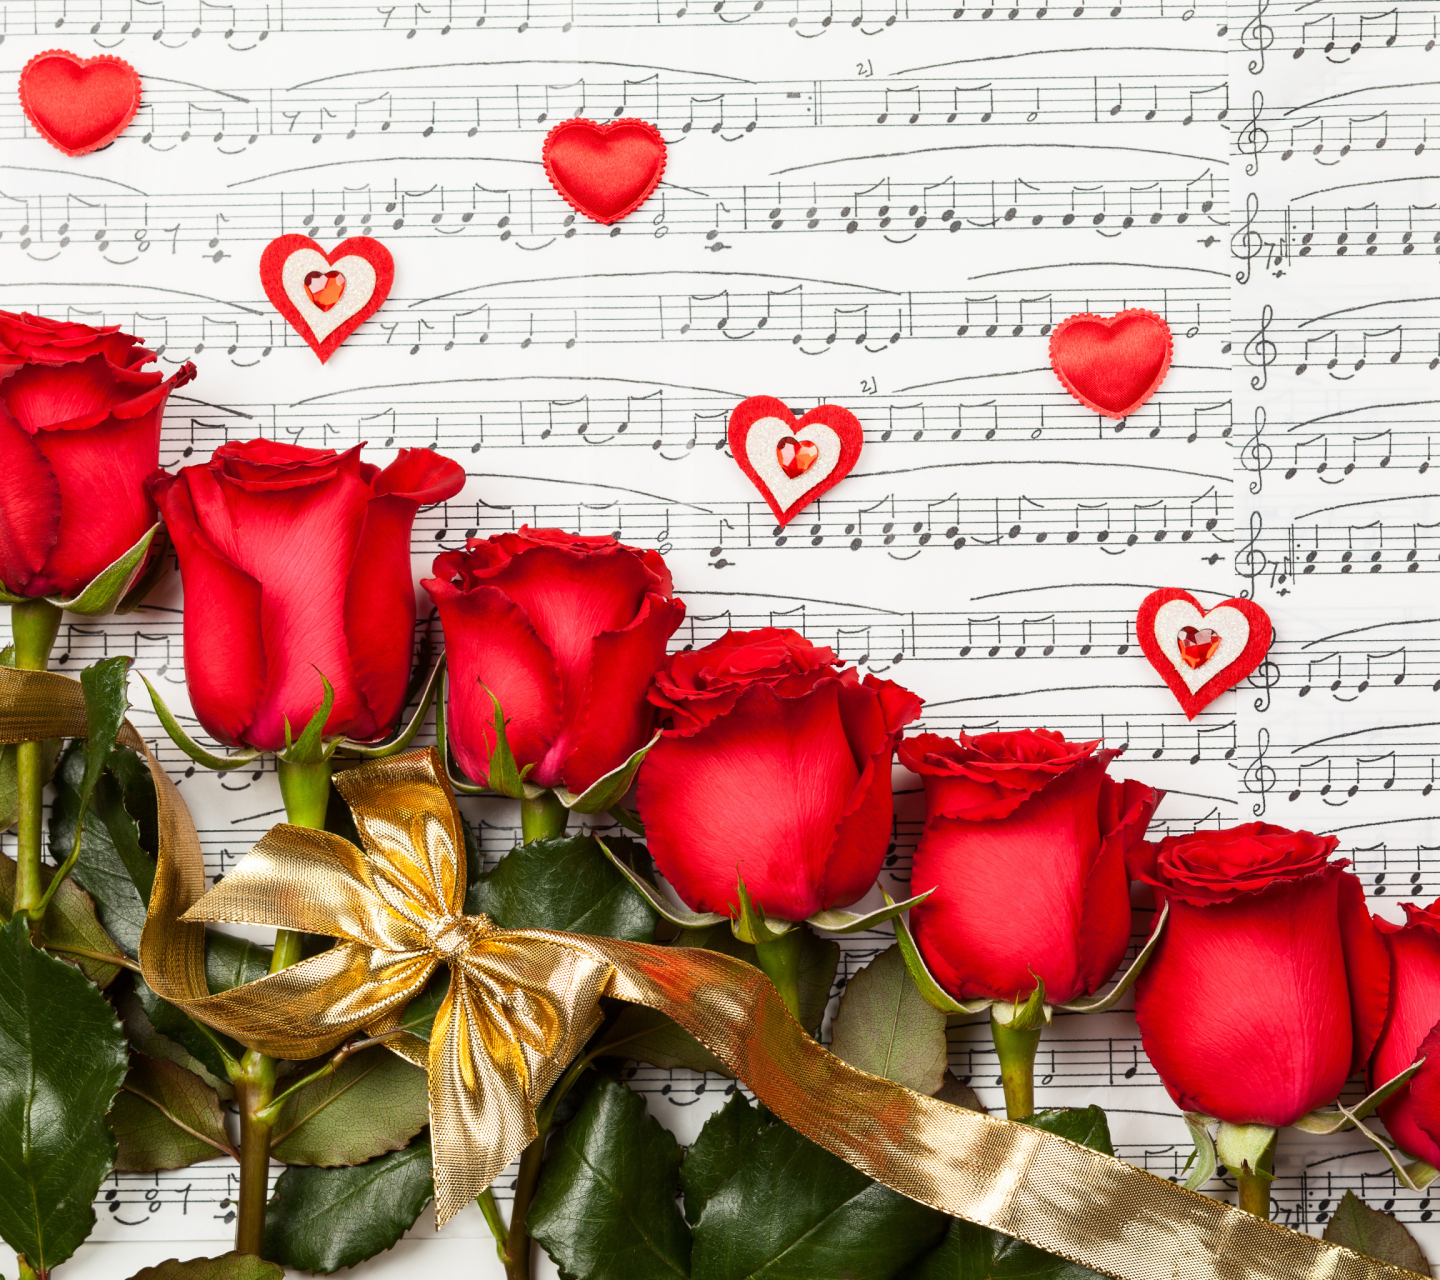 Roses, Love And Music wallpaper 1440x1280